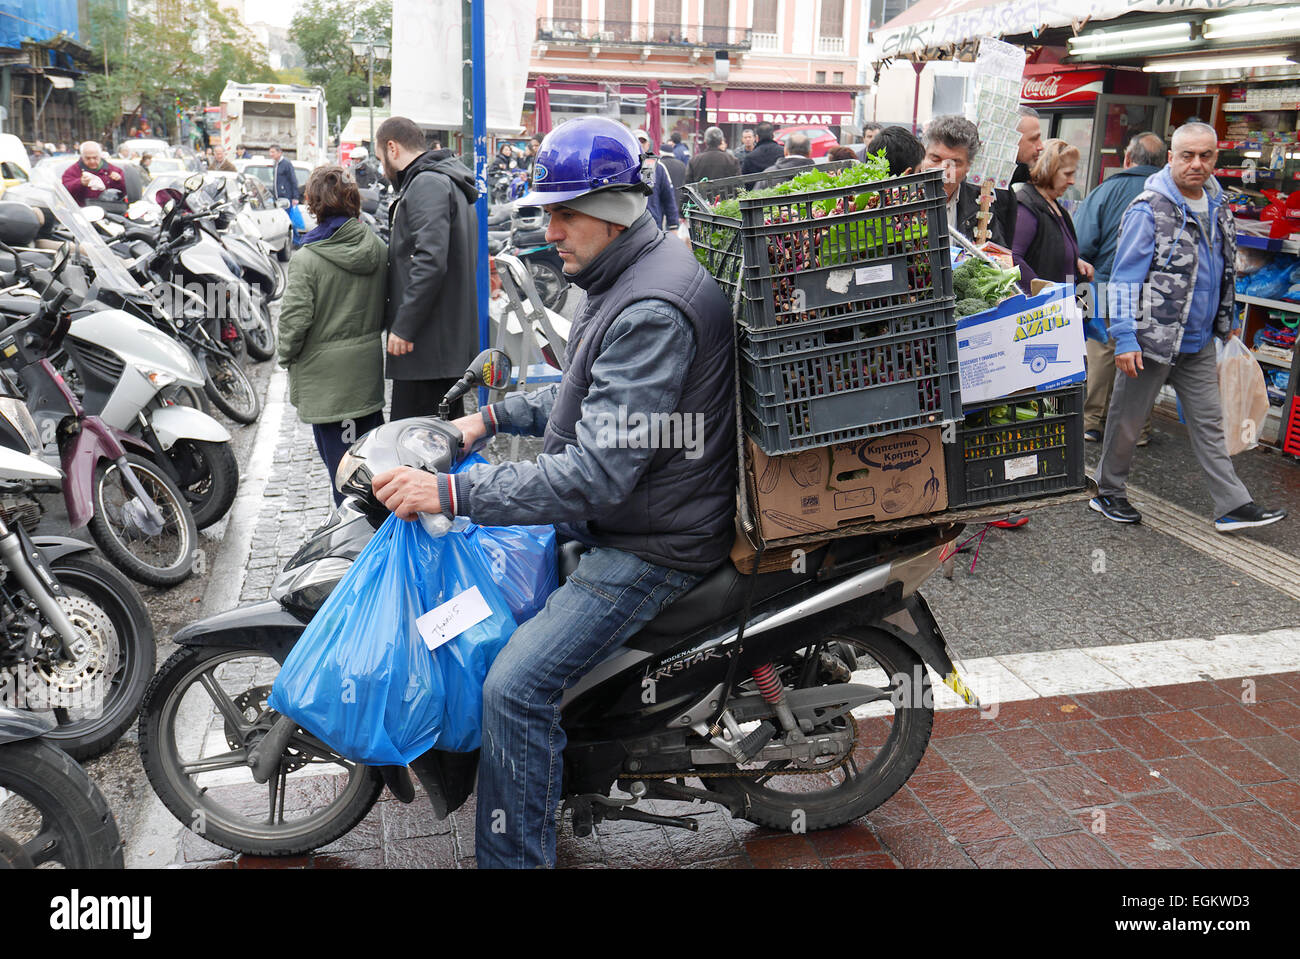 Greek Moped High Resolution Stock Photography and Images - Alamy